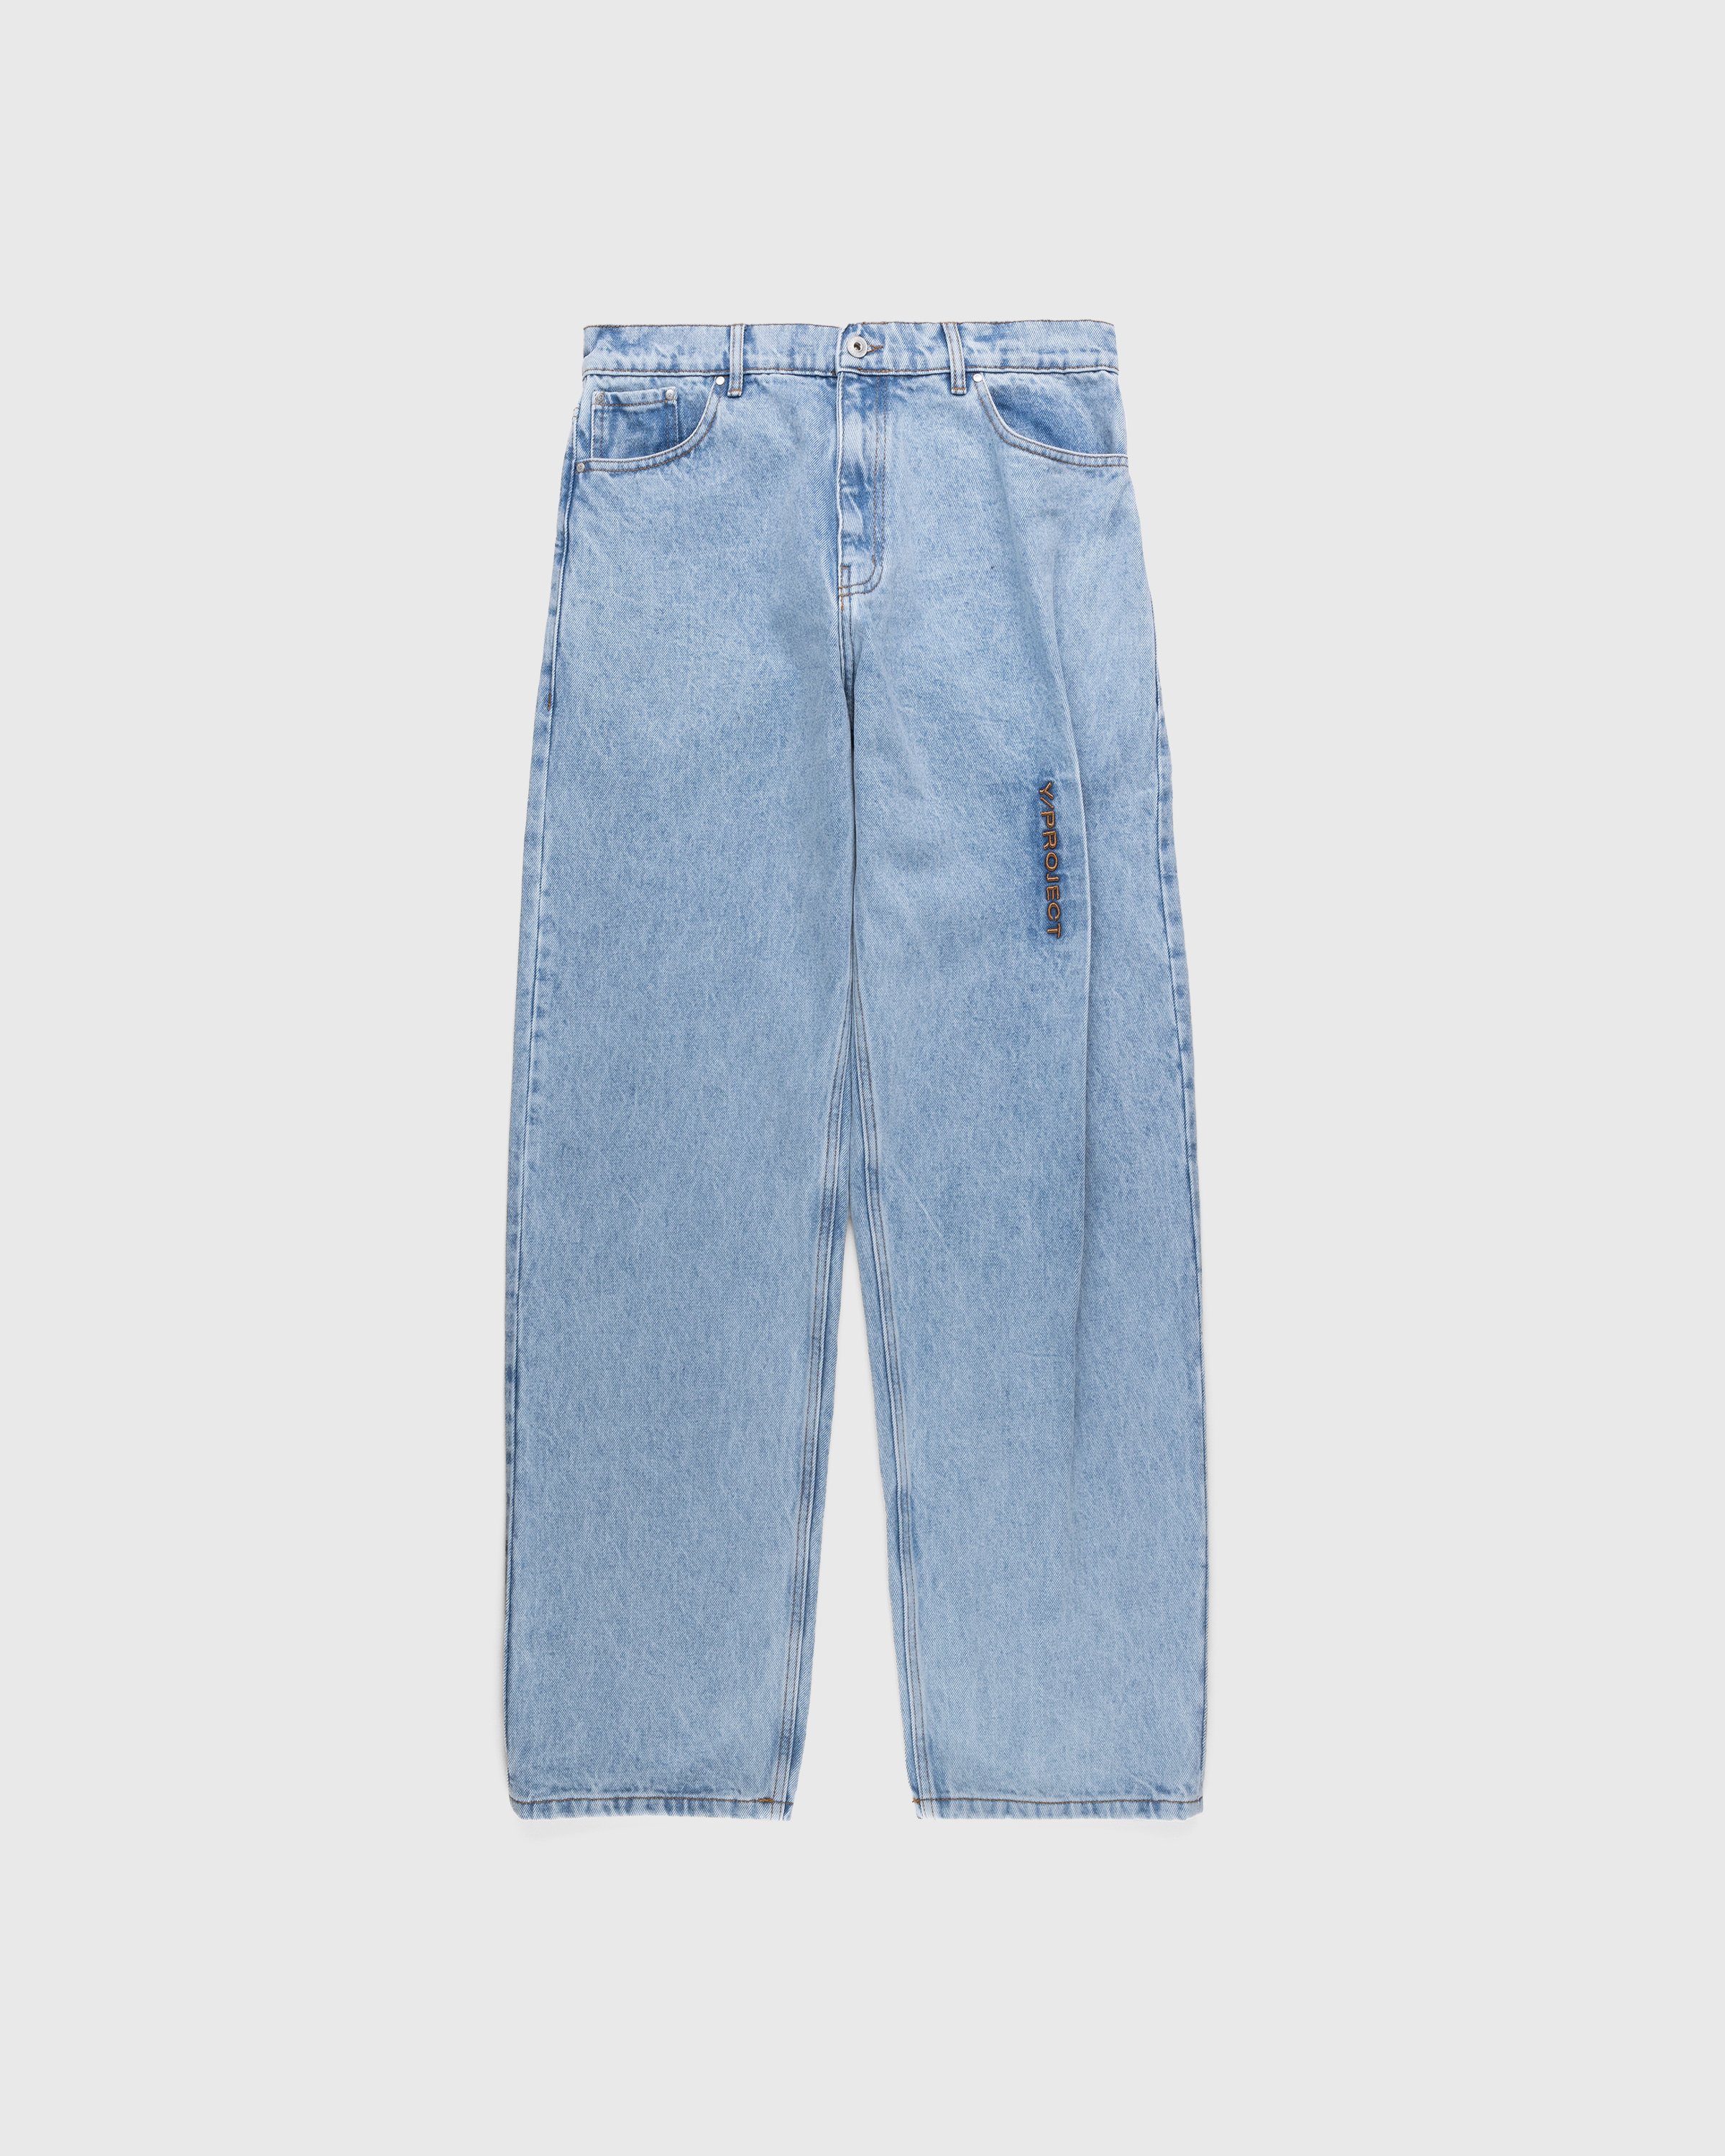 Y/Project – Pinched Logo Jeans Blue | Highsnobiety Shop